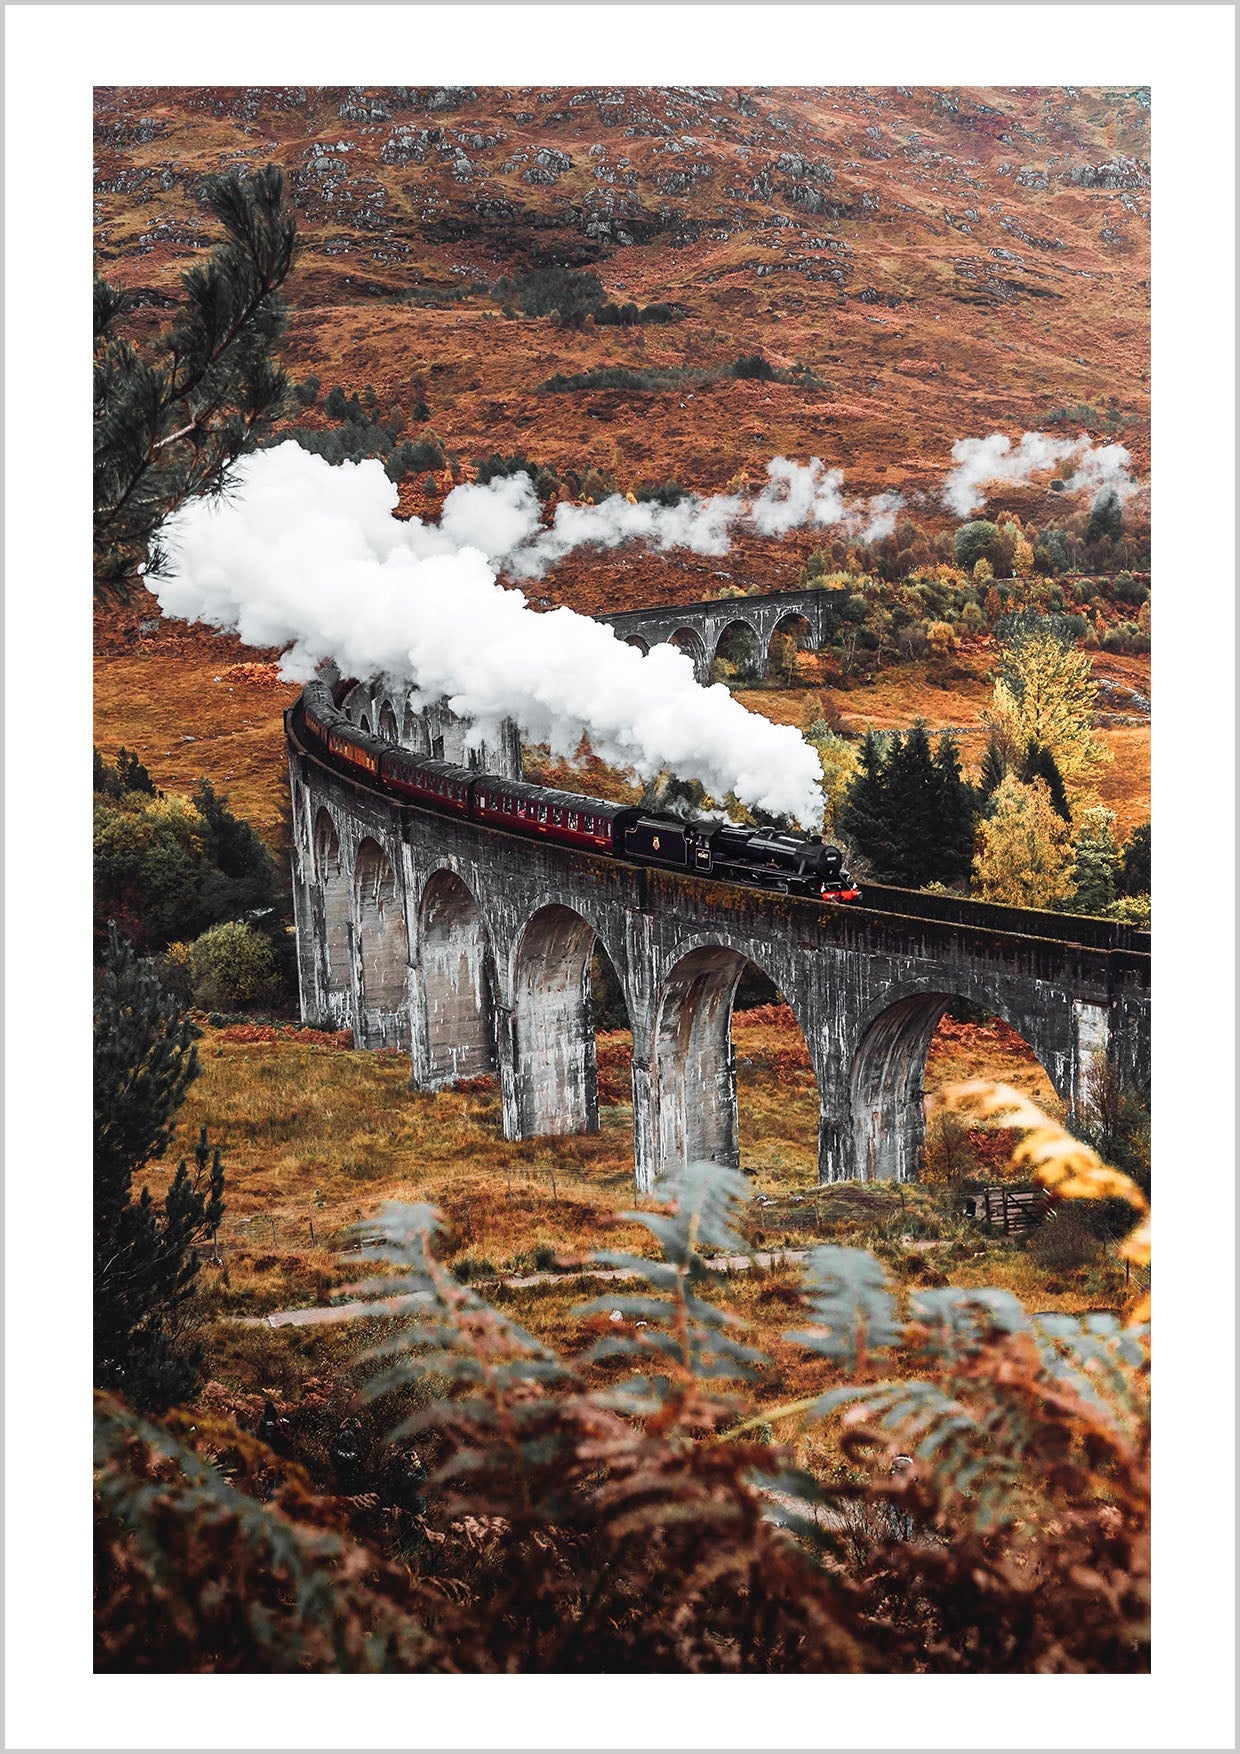 Photography of Glenfinnan Viaduct railway bridge in Scotland. The steam red train drives through the charming bridge, passing a beautiful landscape of hills and forests.